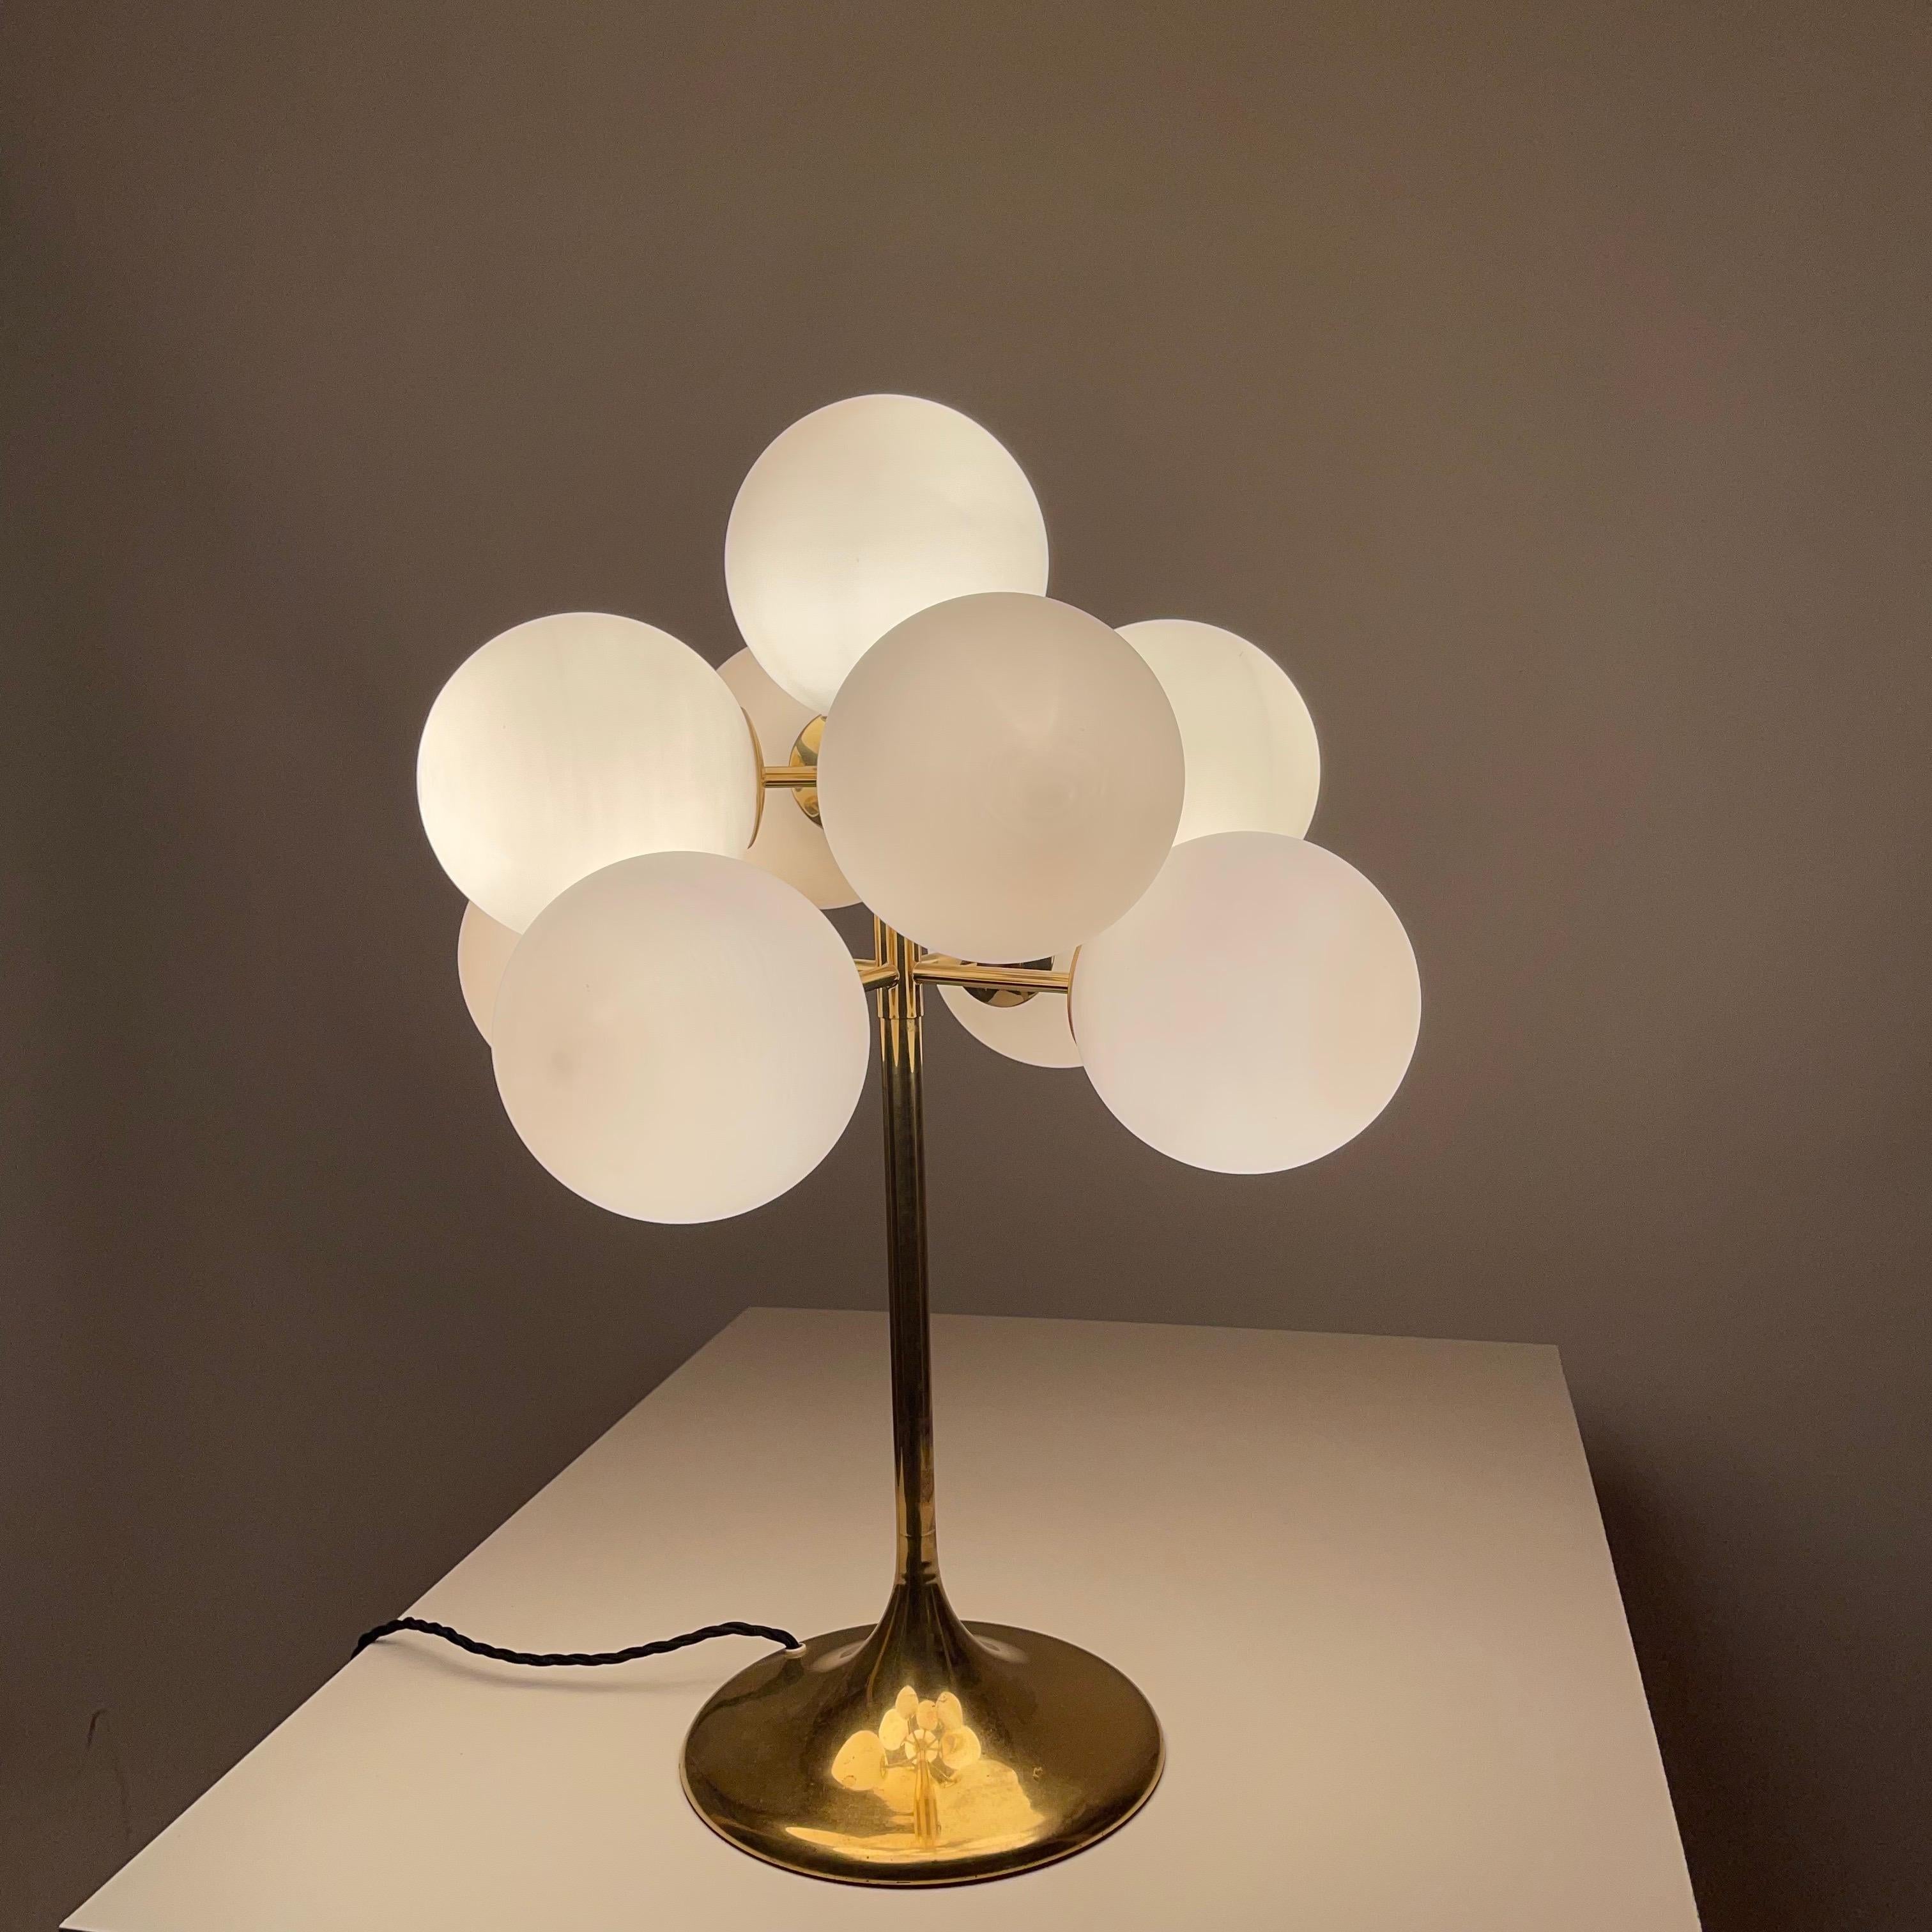 Large Atomic Max Bill Brass Table Lamp by BAG Turgi, Switzerland, 1960s In Good Condition For Sale In Vienna, AT